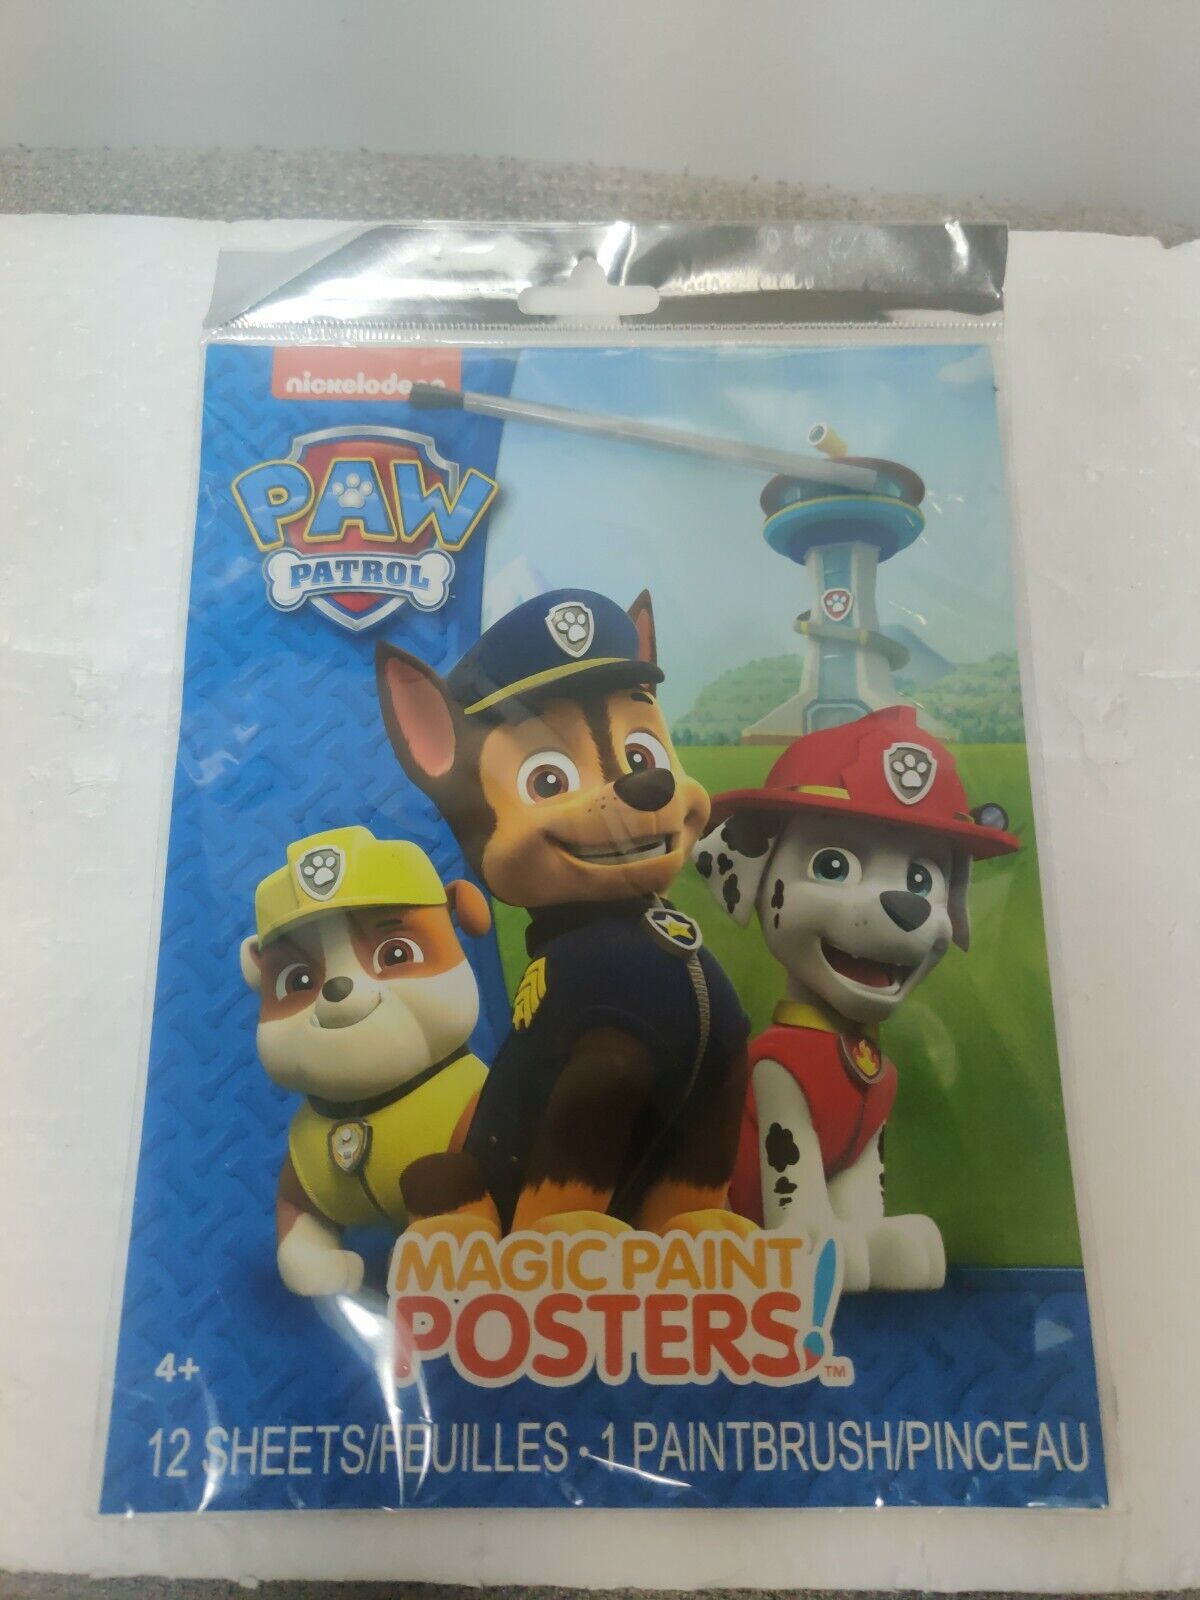 Paw Patrol Magic Paint Posters, 12 Sheets, 1 Paintbrush, New